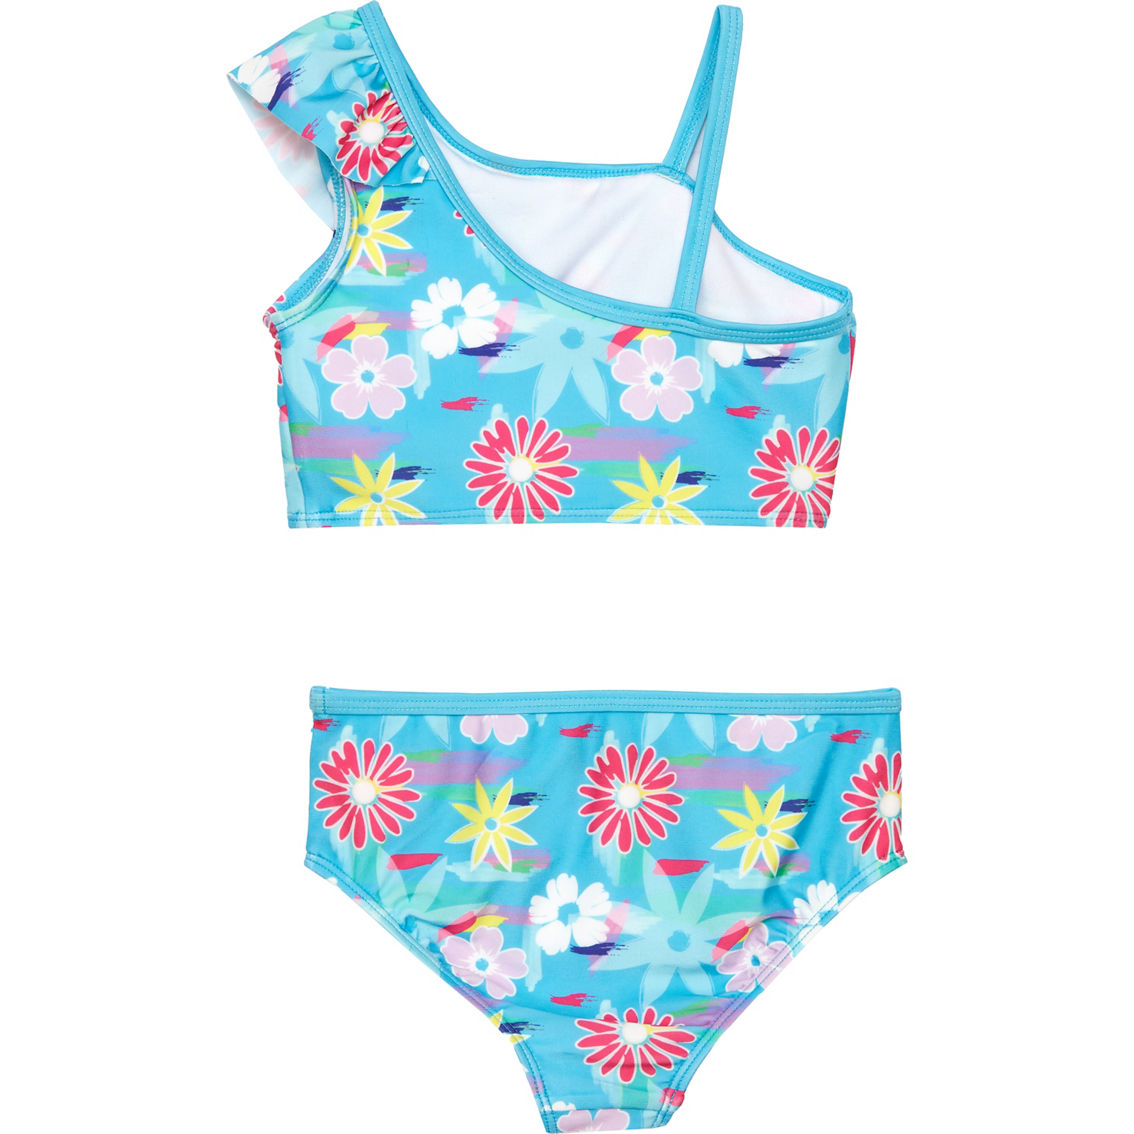 Surf Zone Little Girls Floral Ruffle Shoulder 2 pc. Swimsuit - Image 2 of 2